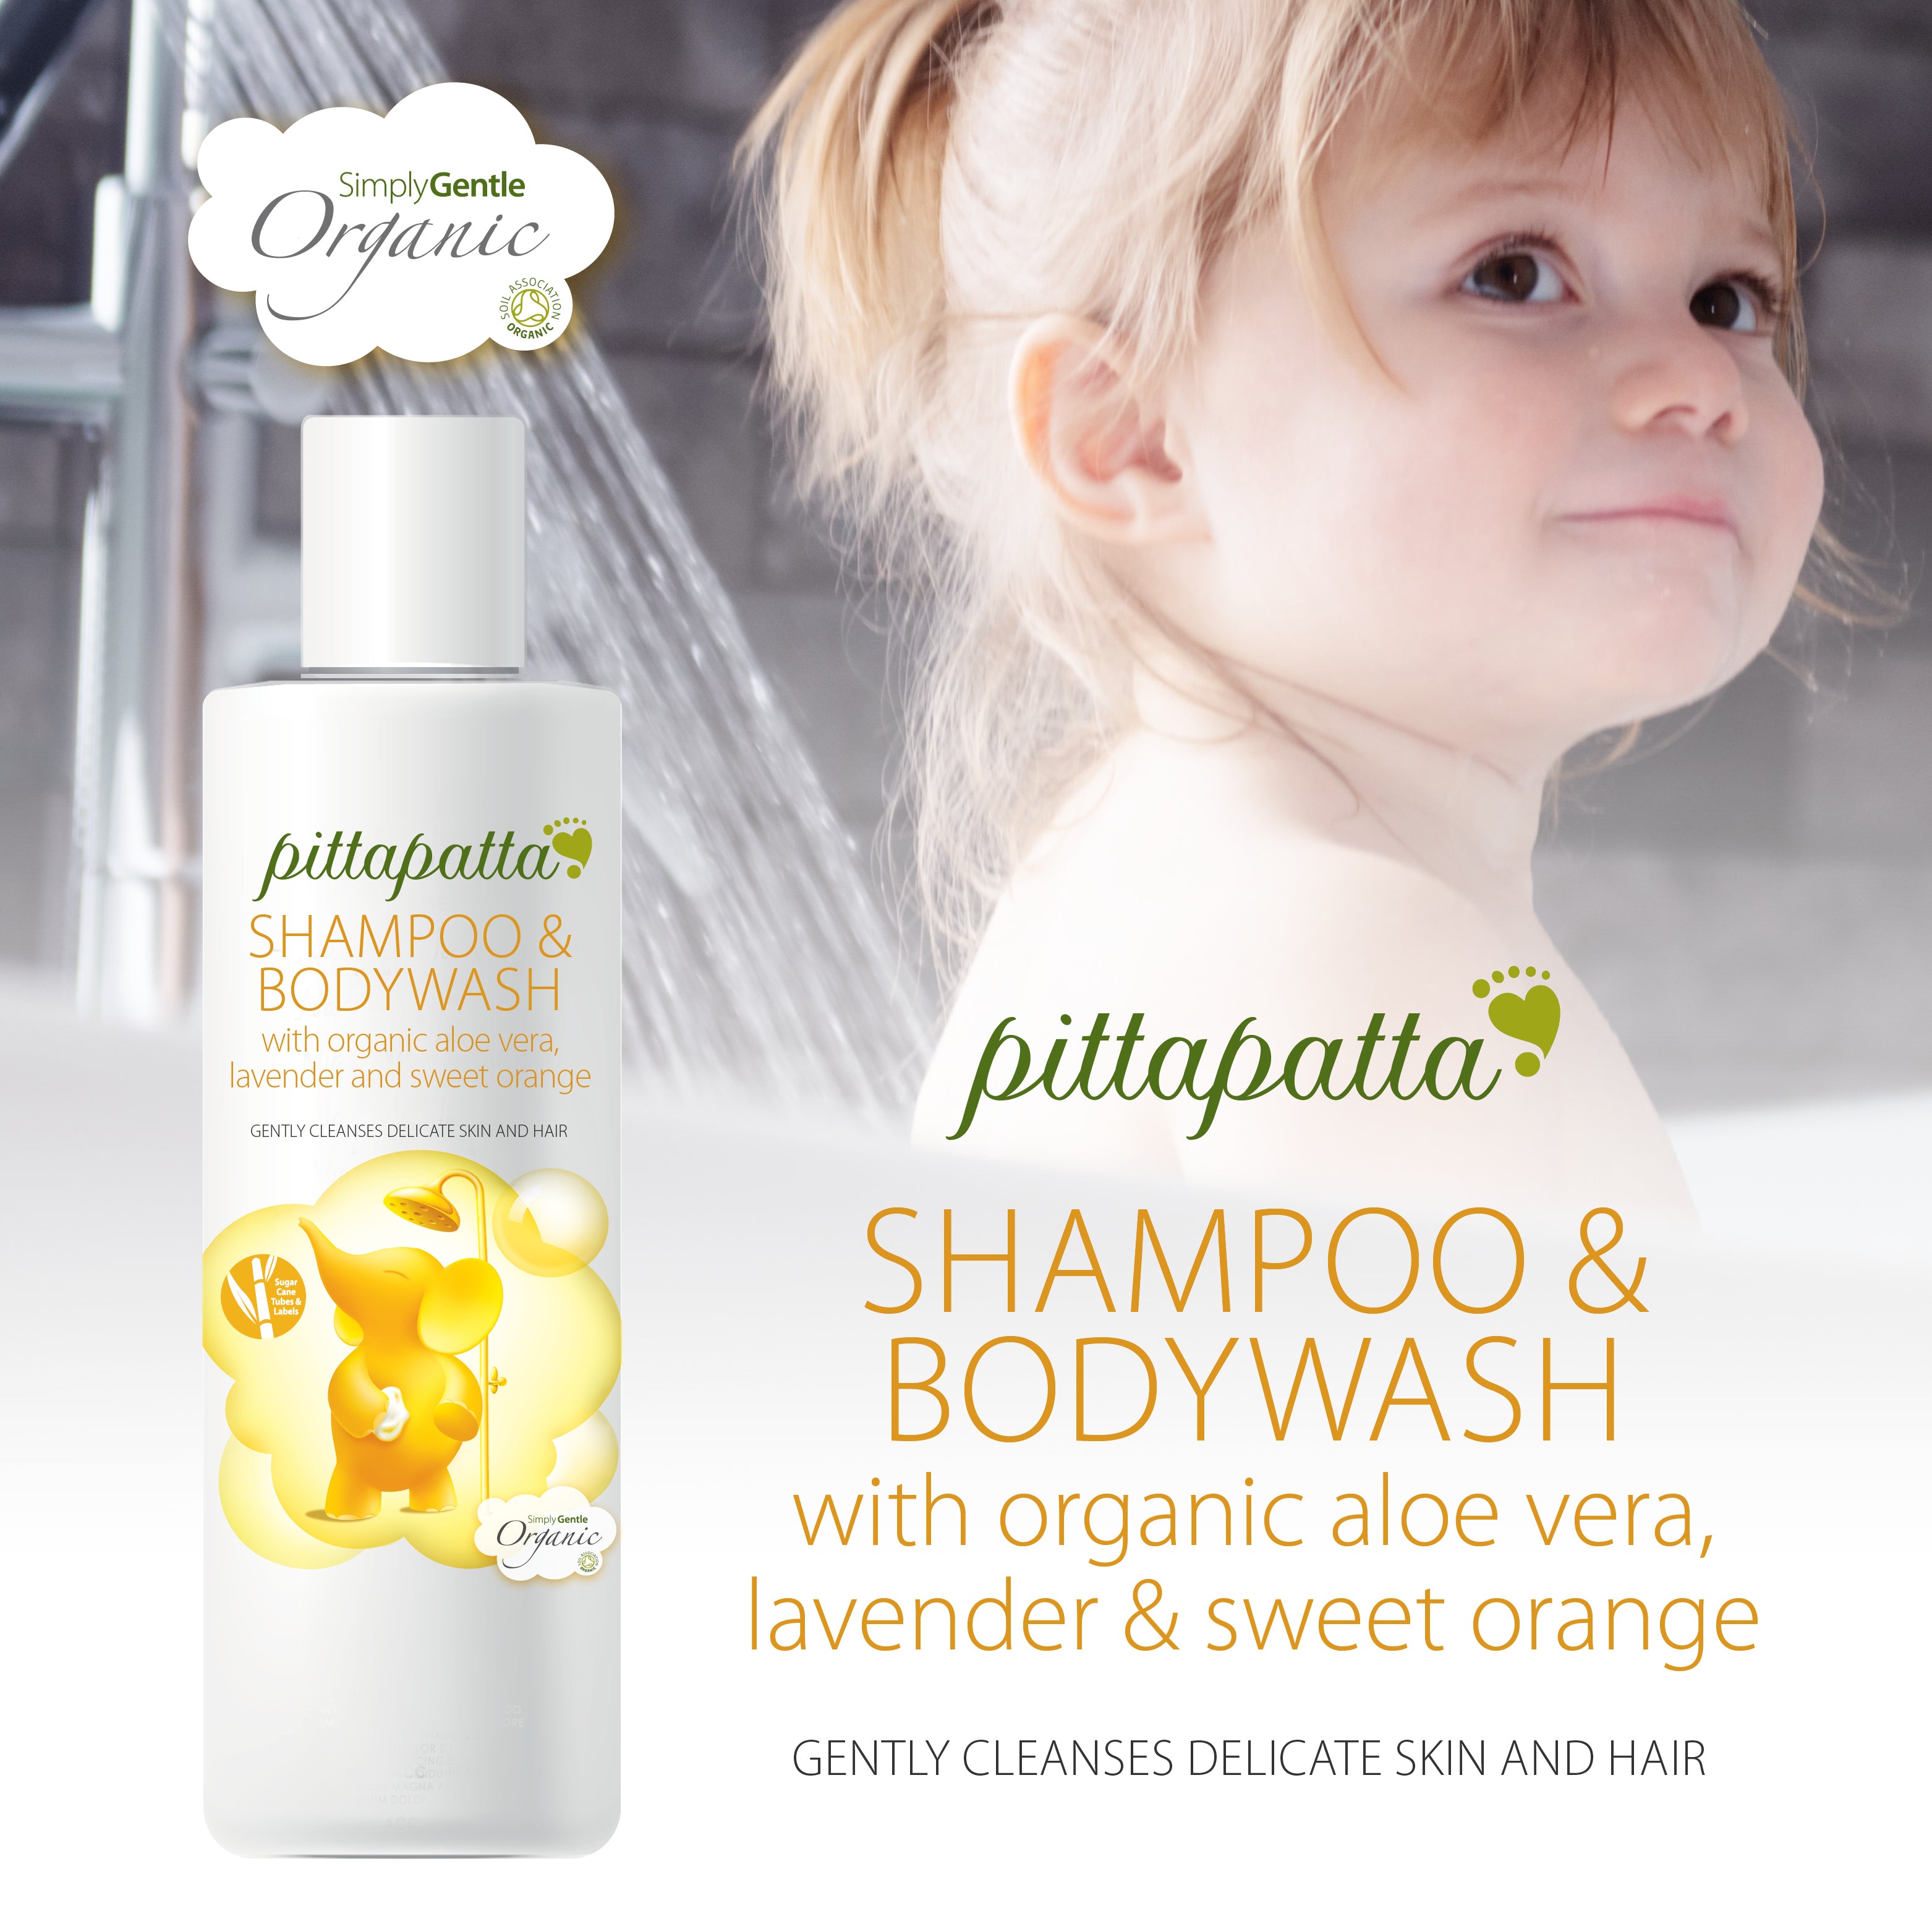 Pittapatta Shampoo & Bodywash with organic aloe vera, lavender & sweet orange. Gently cleanses delicate skin and hair 